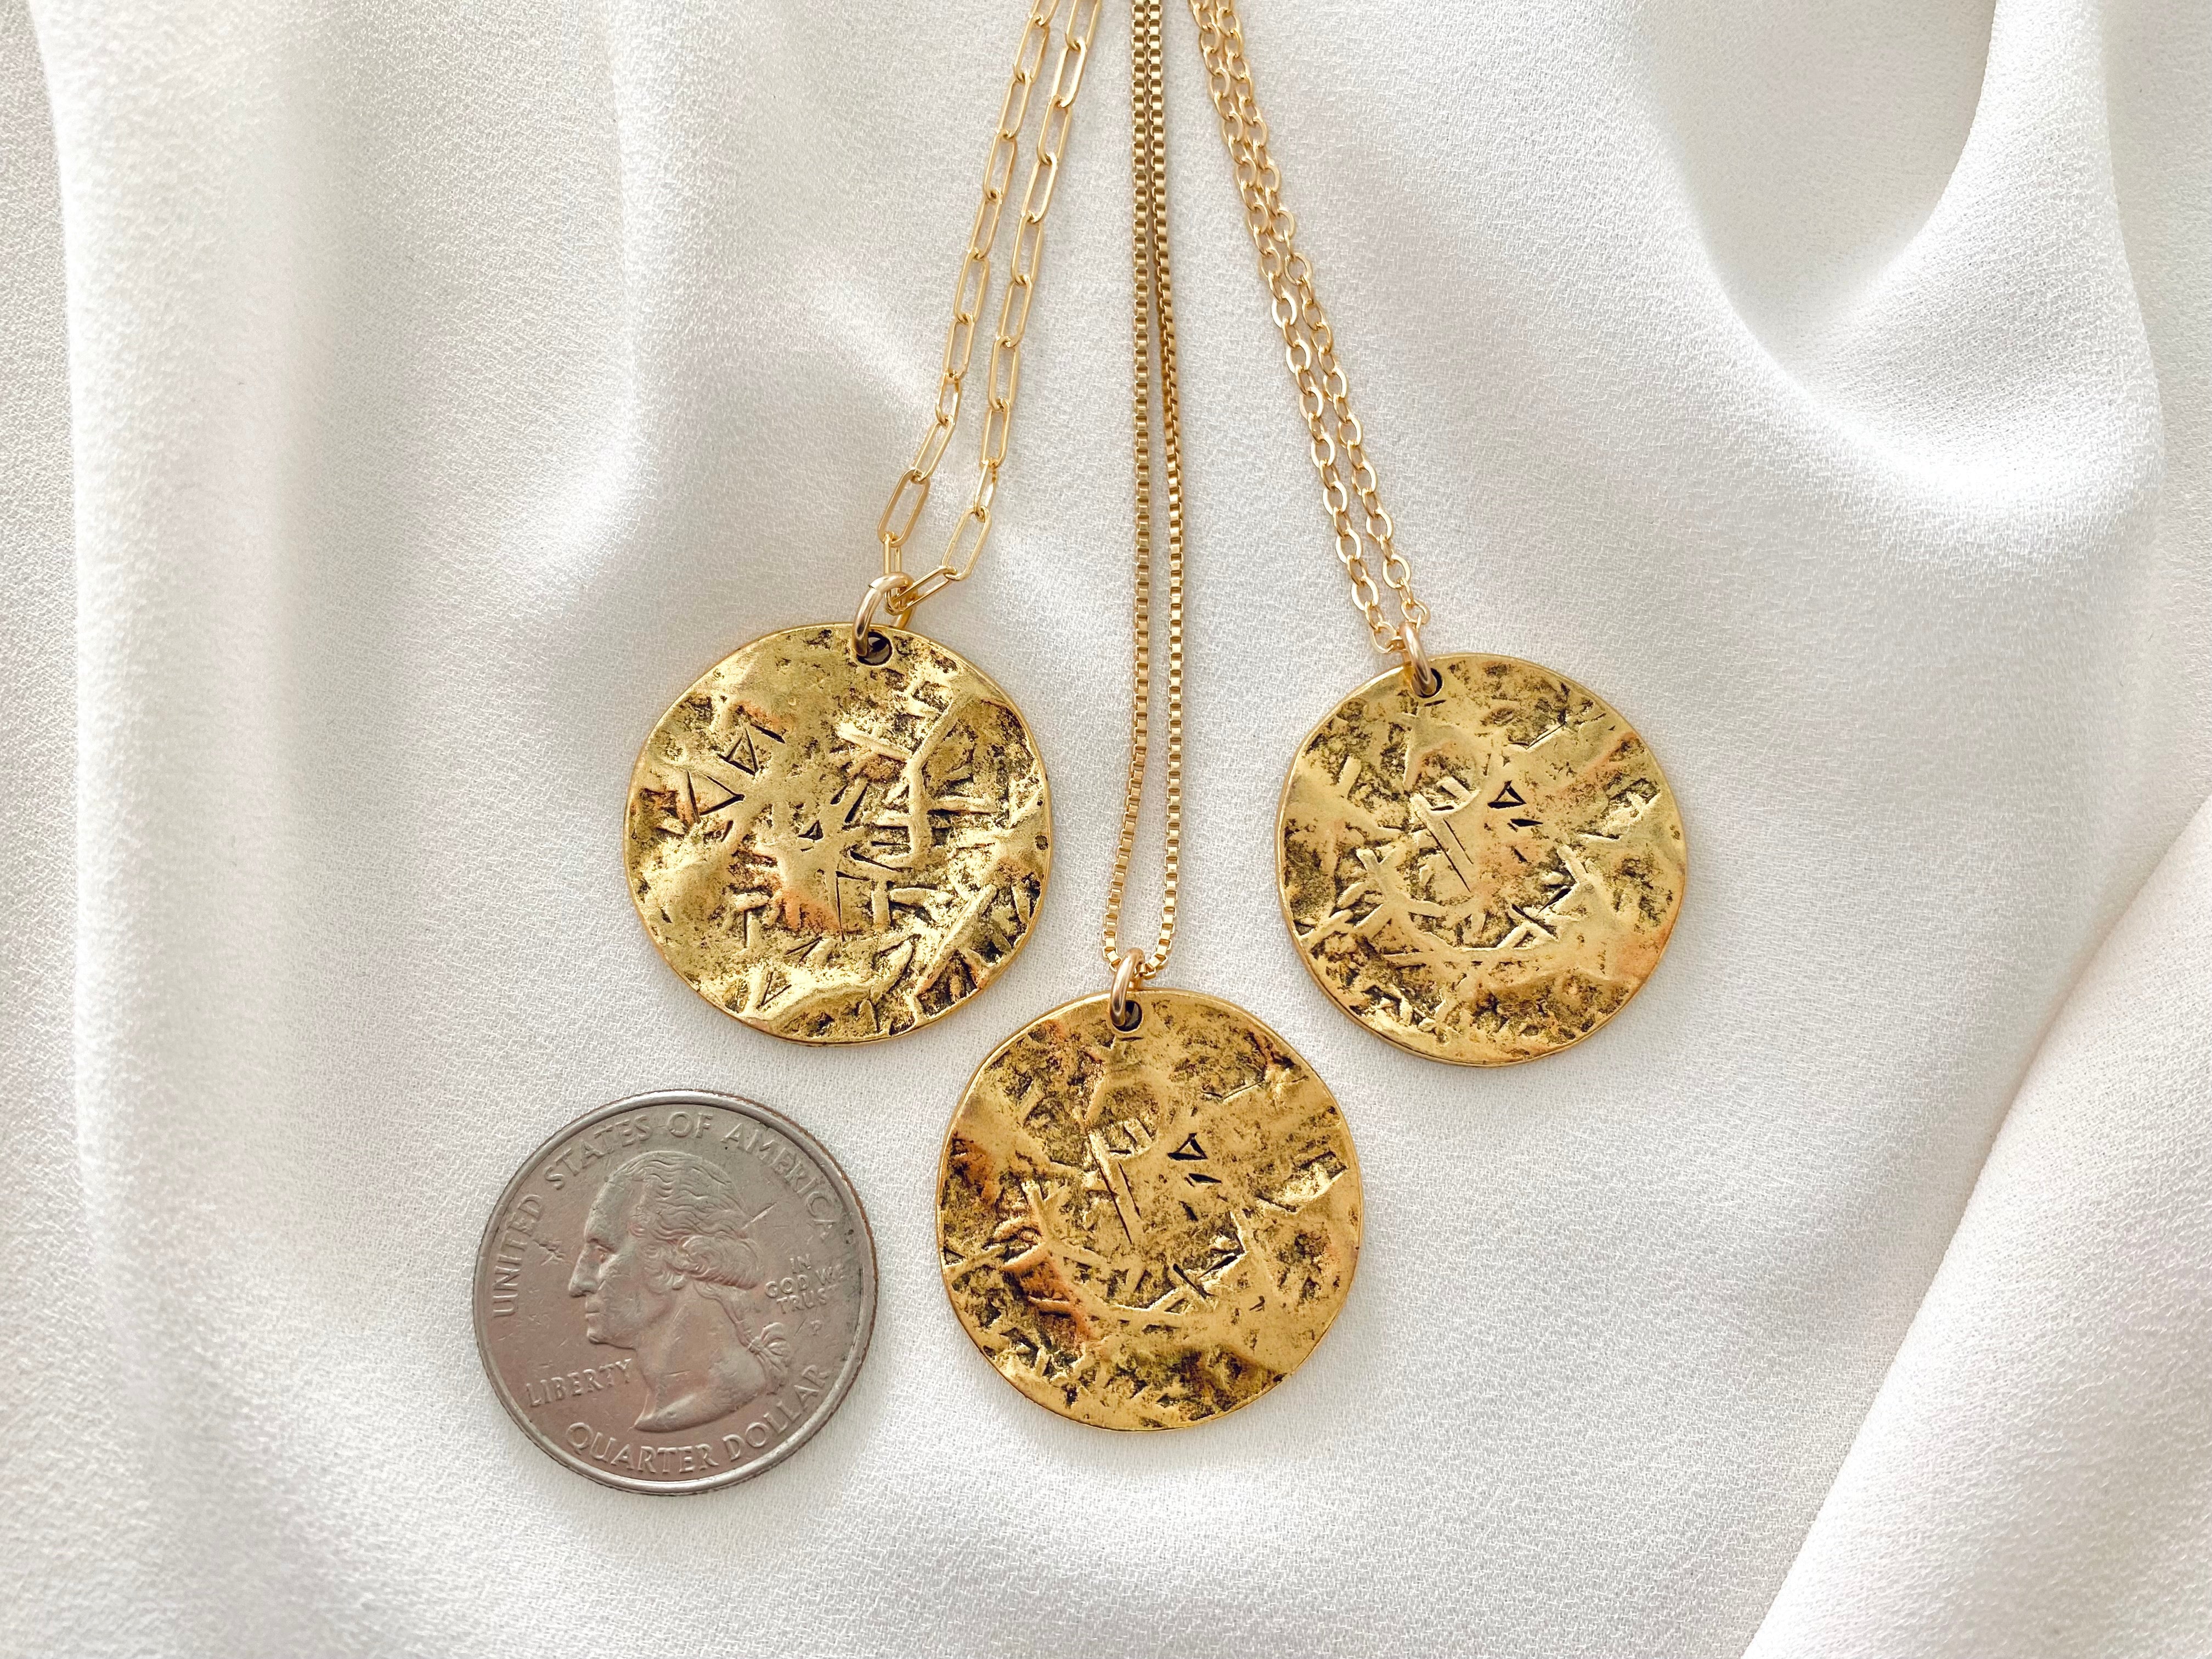 Gold Textured Coin Medallion Necklace - Gold Filled Chain